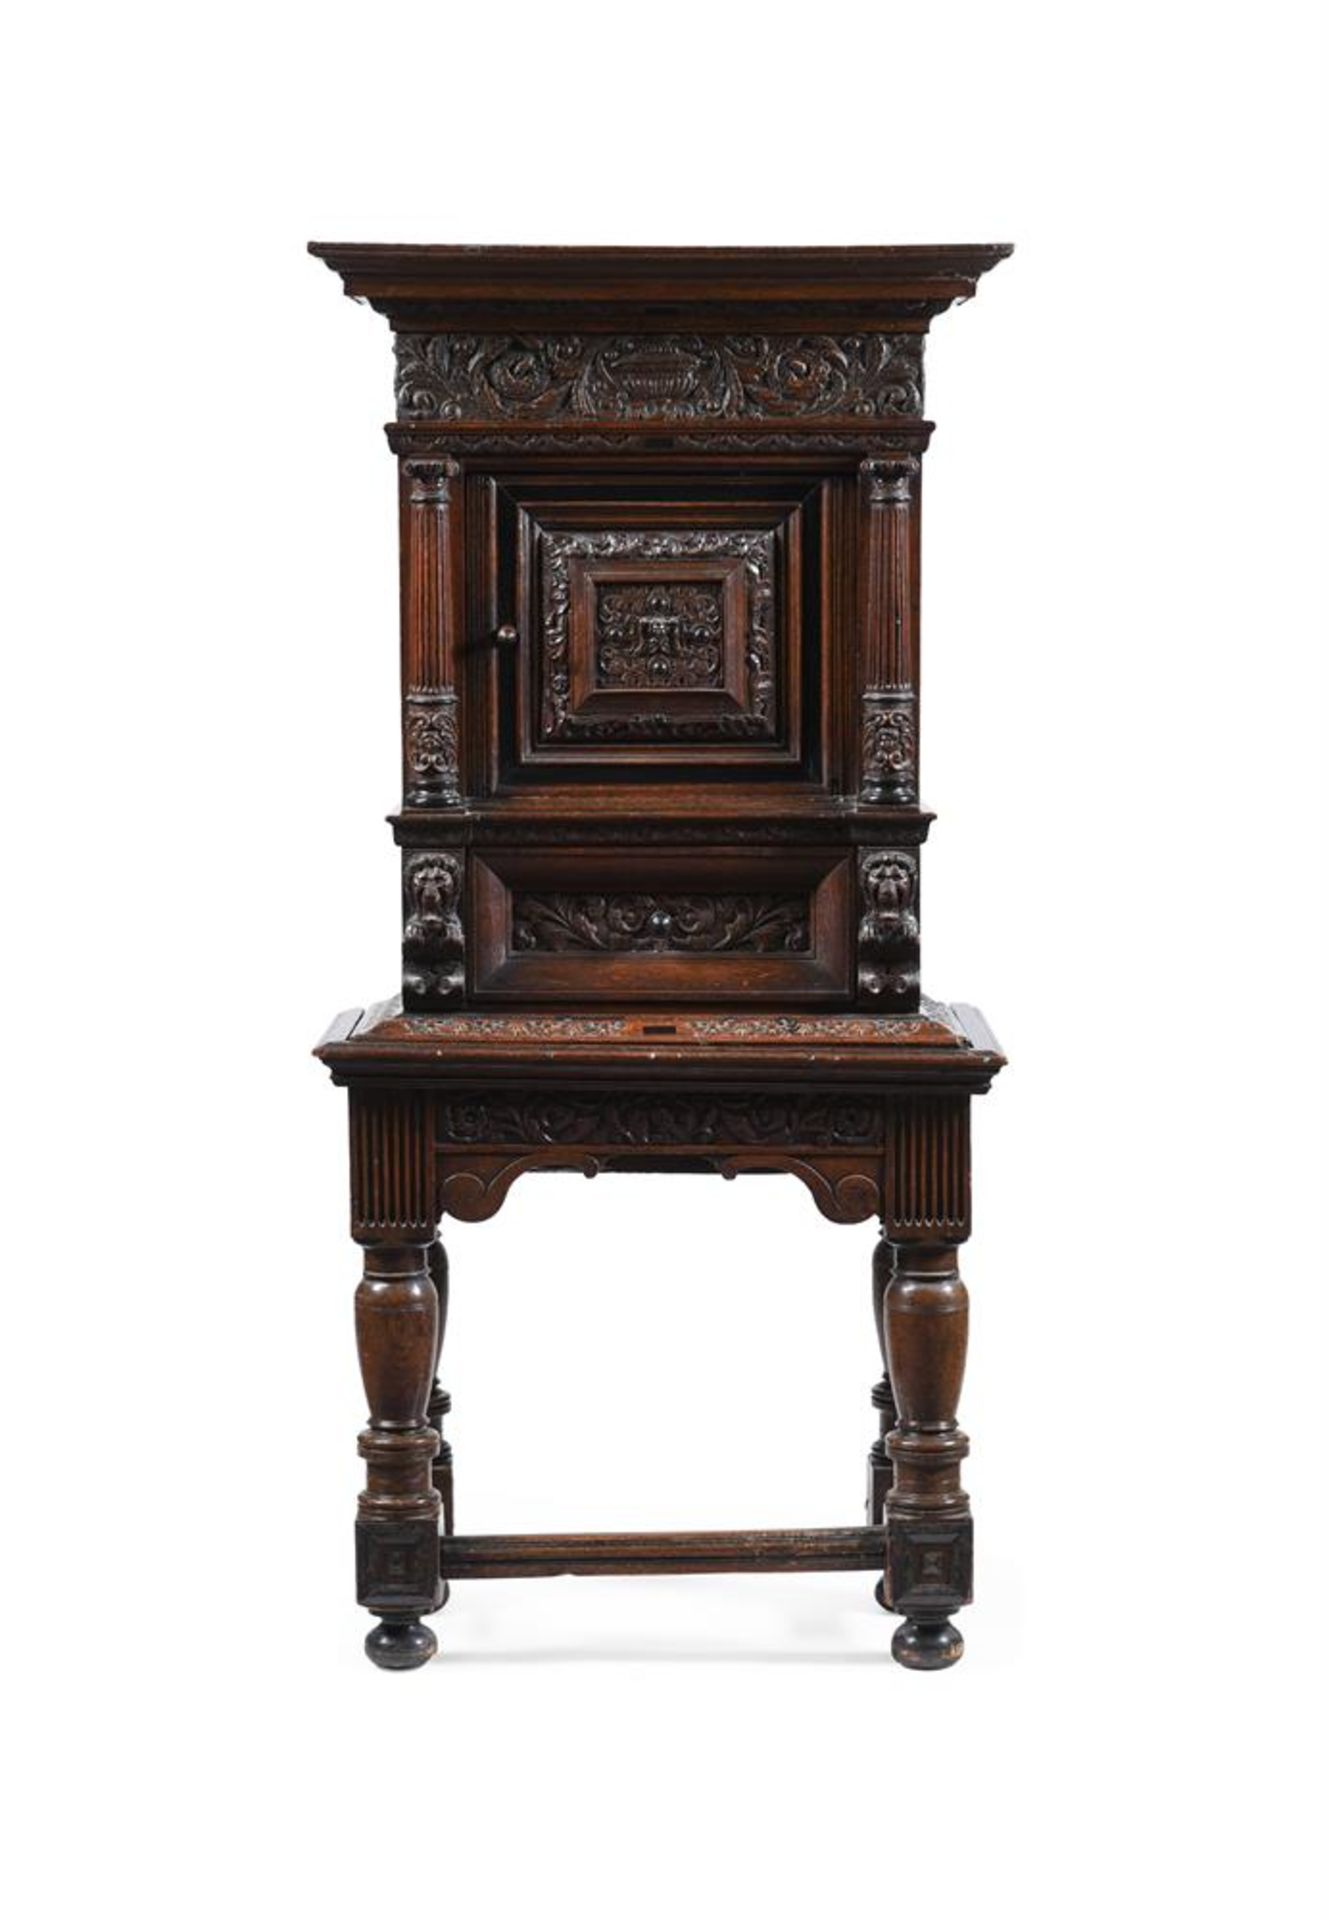 Y A DUTCH OAK AND EBONY CABINET ON STAND OR 'KAST'